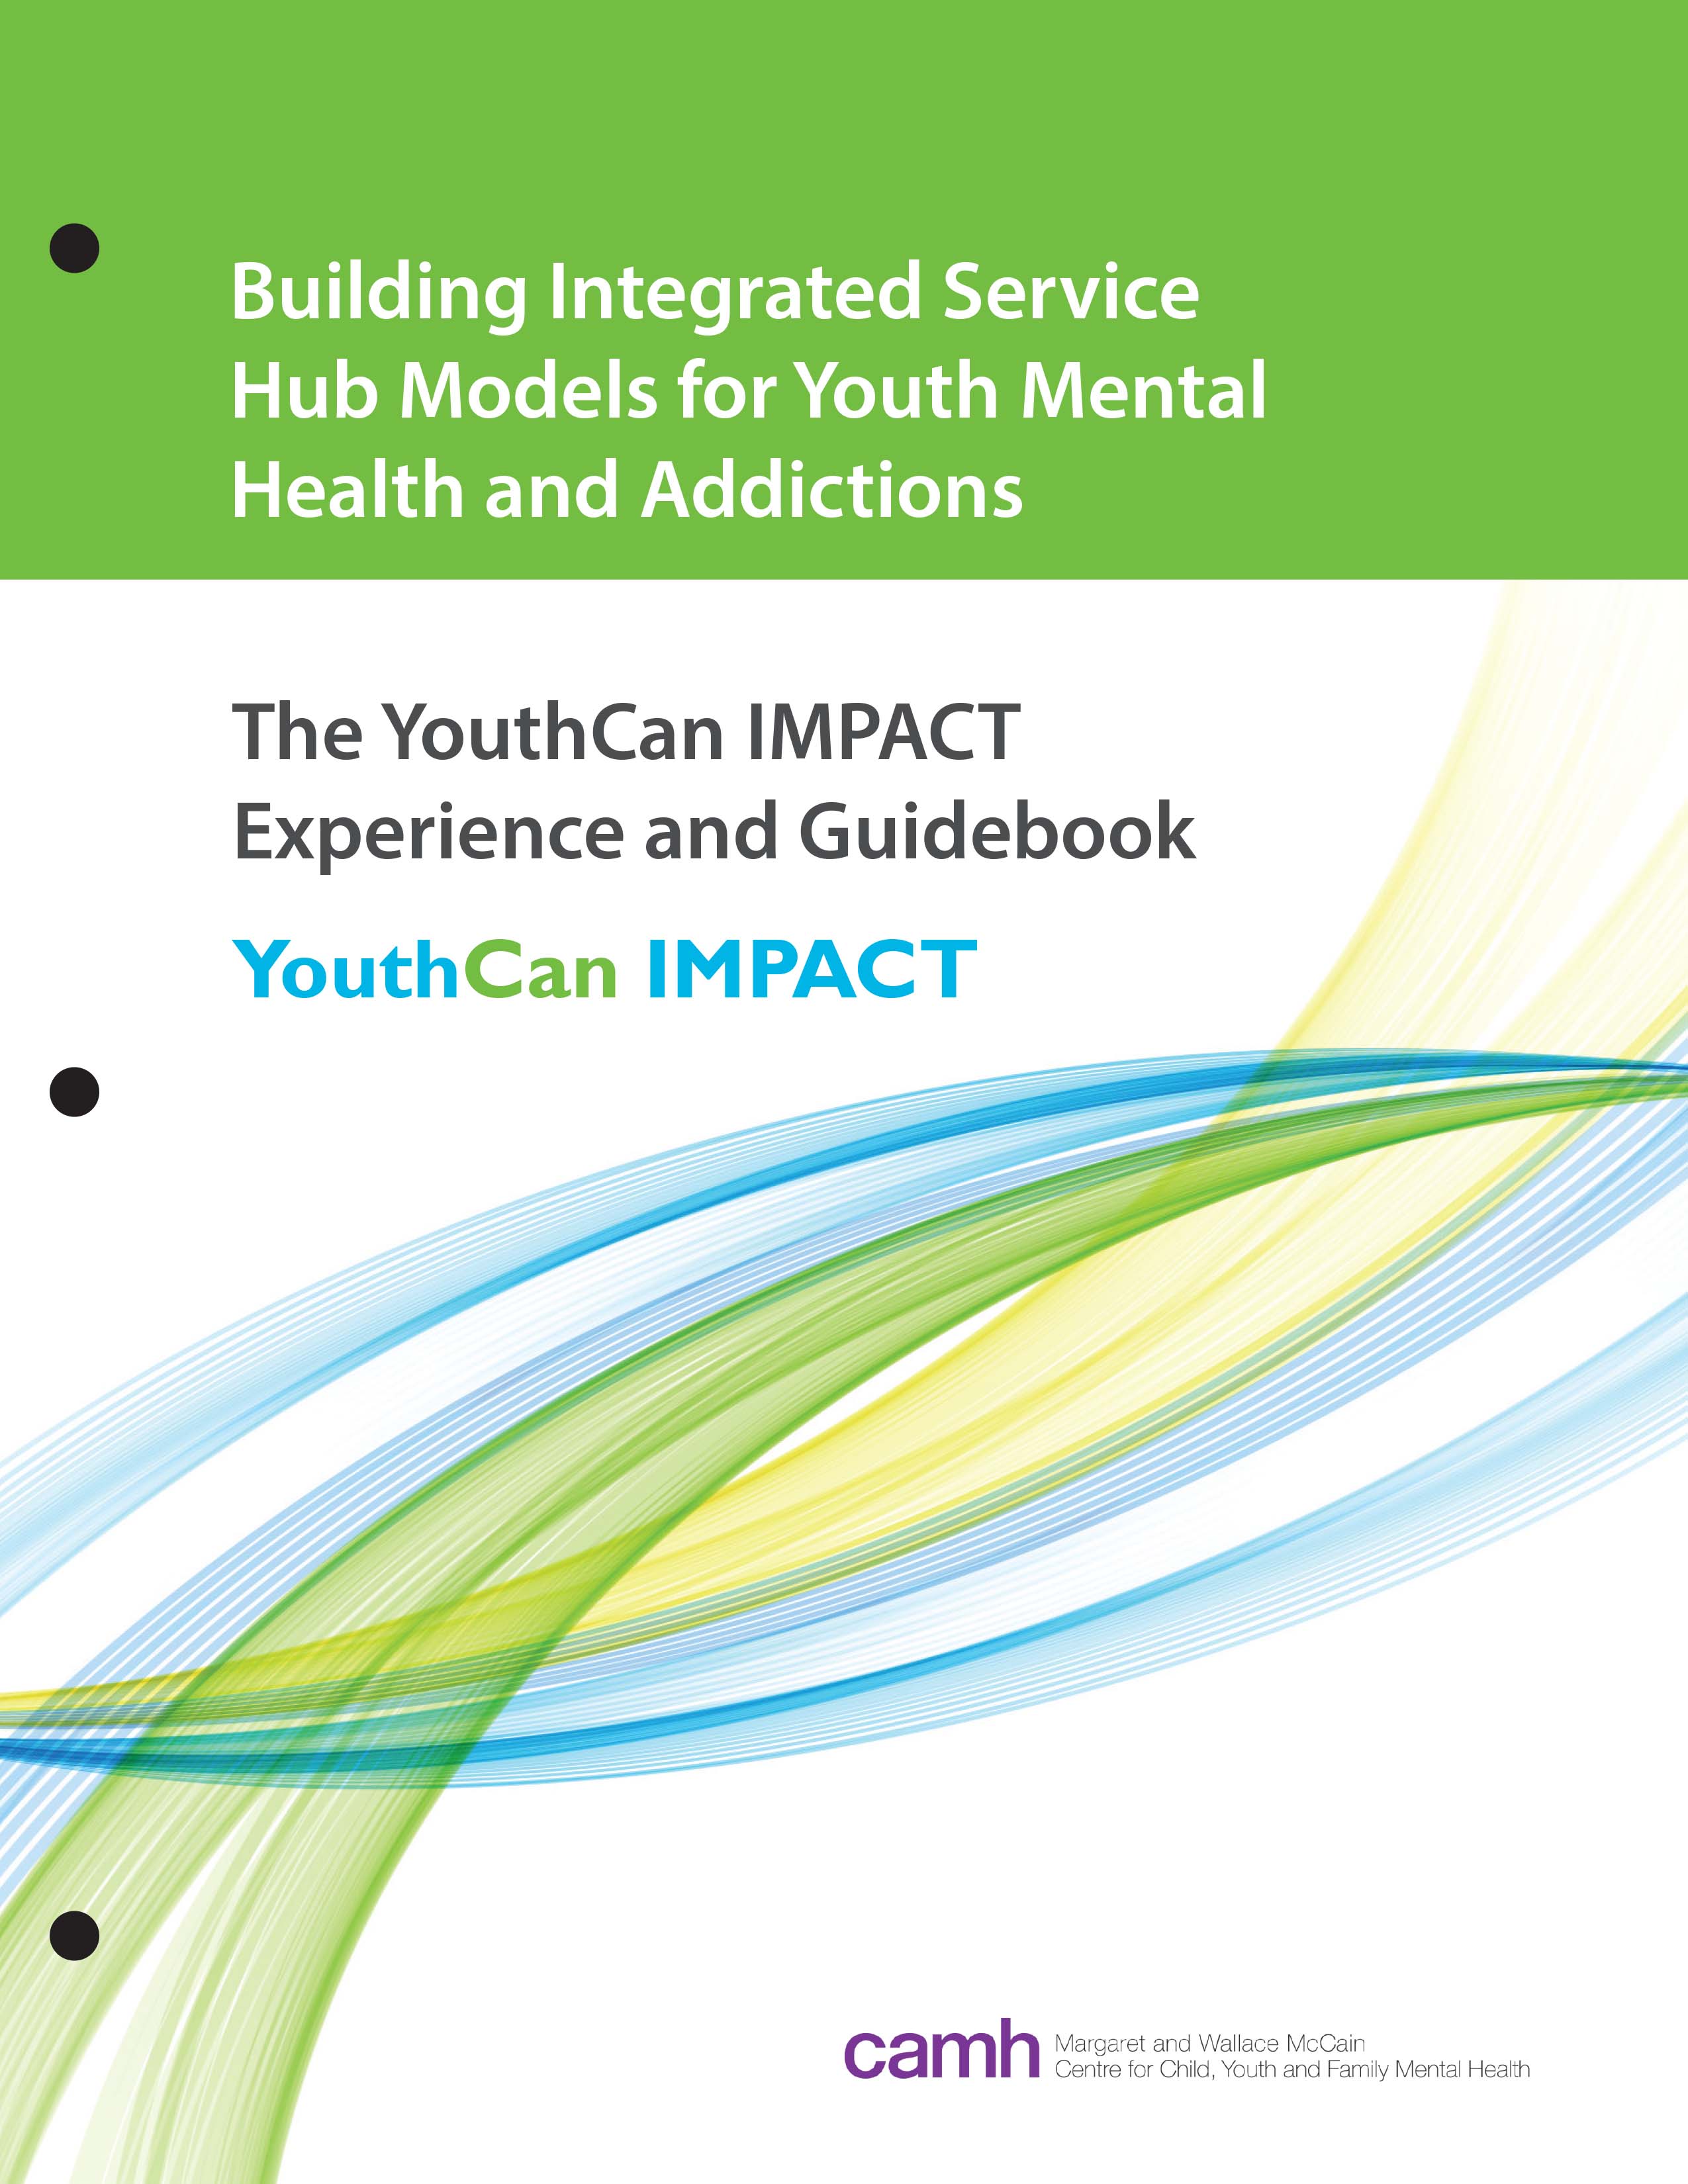 The YouthCan IMPACT guidebook.